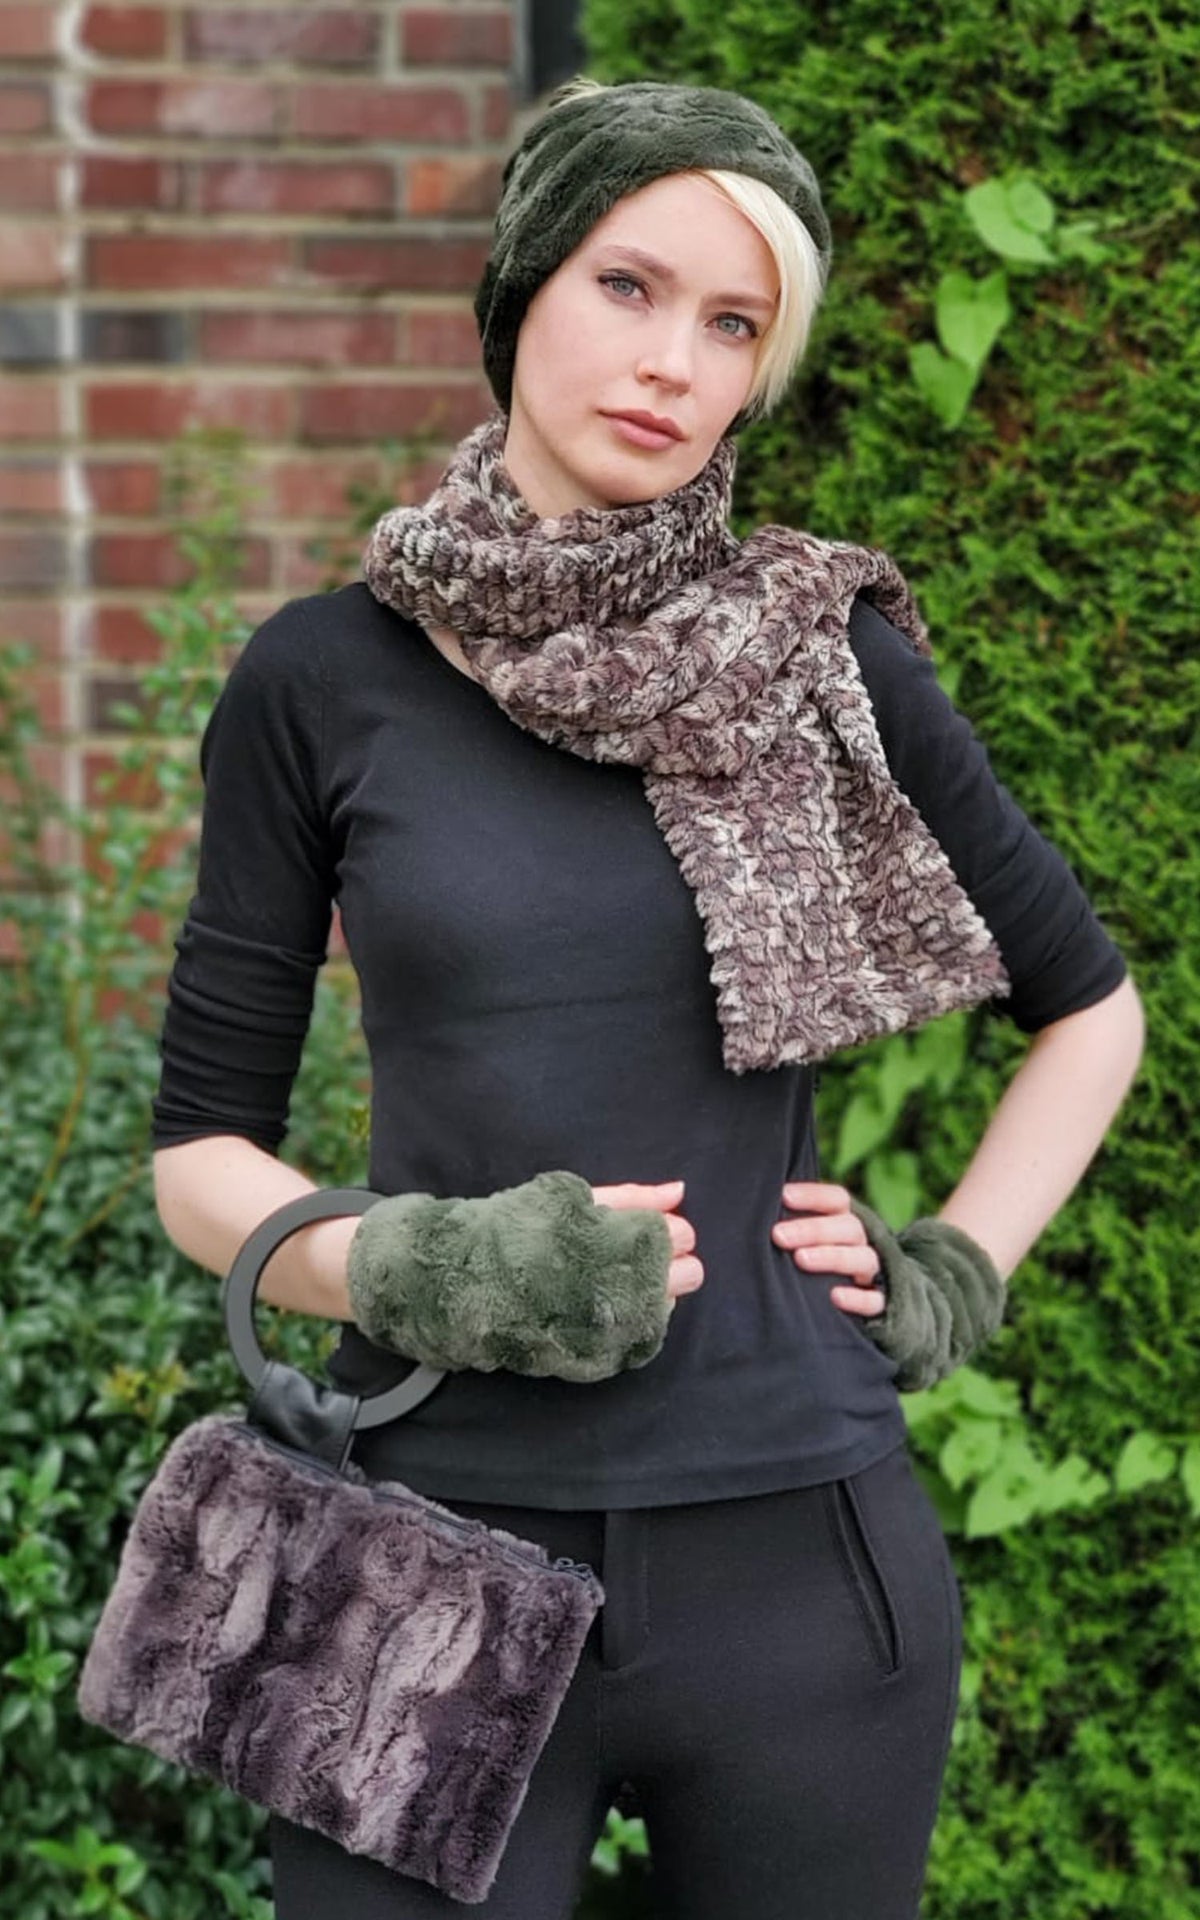 Women wearing army greed headband Paris handbag and Classic Scarf | Calico faux fur in brown crems and black | Handmade by Pandemonium Millinery Seattle, WA USA